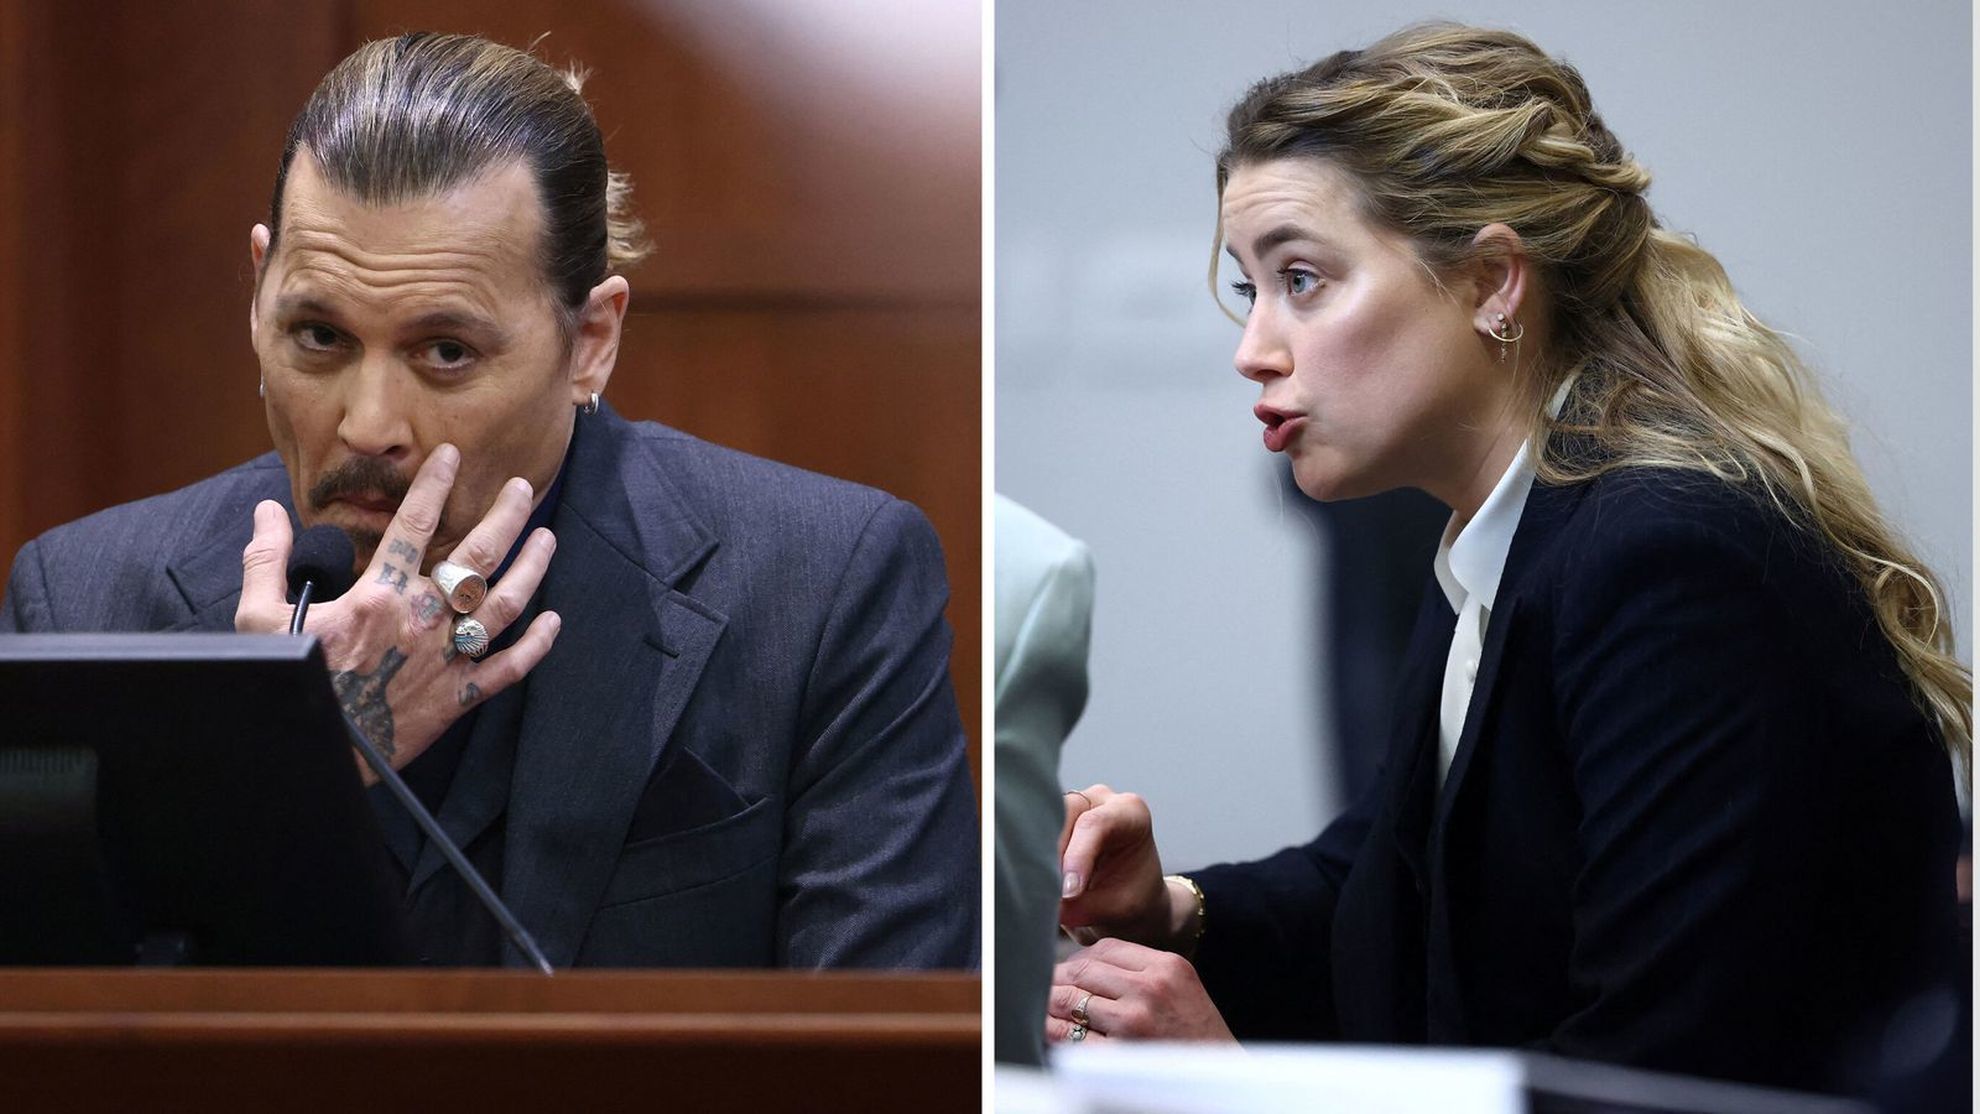 Johnny Depp vs Amber Heard trial LIVE: Latest news from the defamation courtroom battle